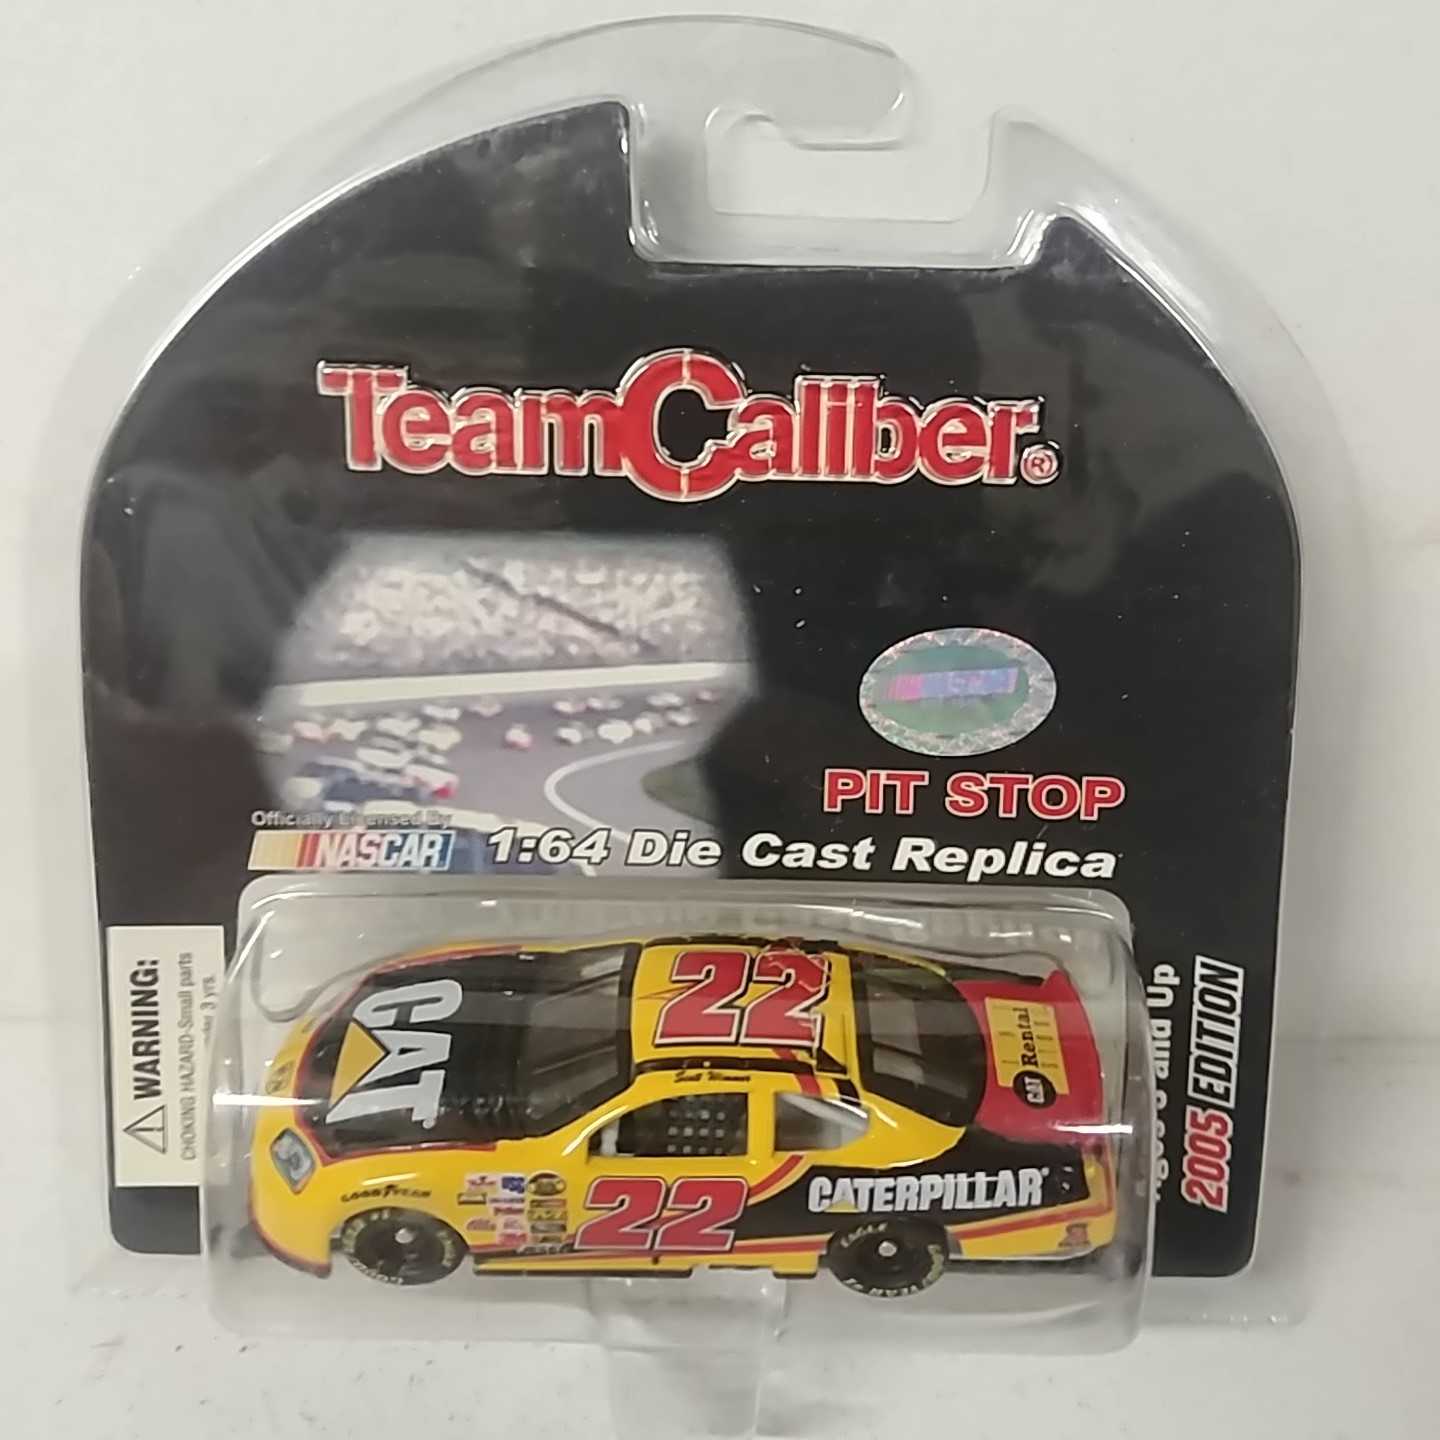 2005 Scott Wimmer 1/64th Caterpillar Dodge Charger Pitstop Series car